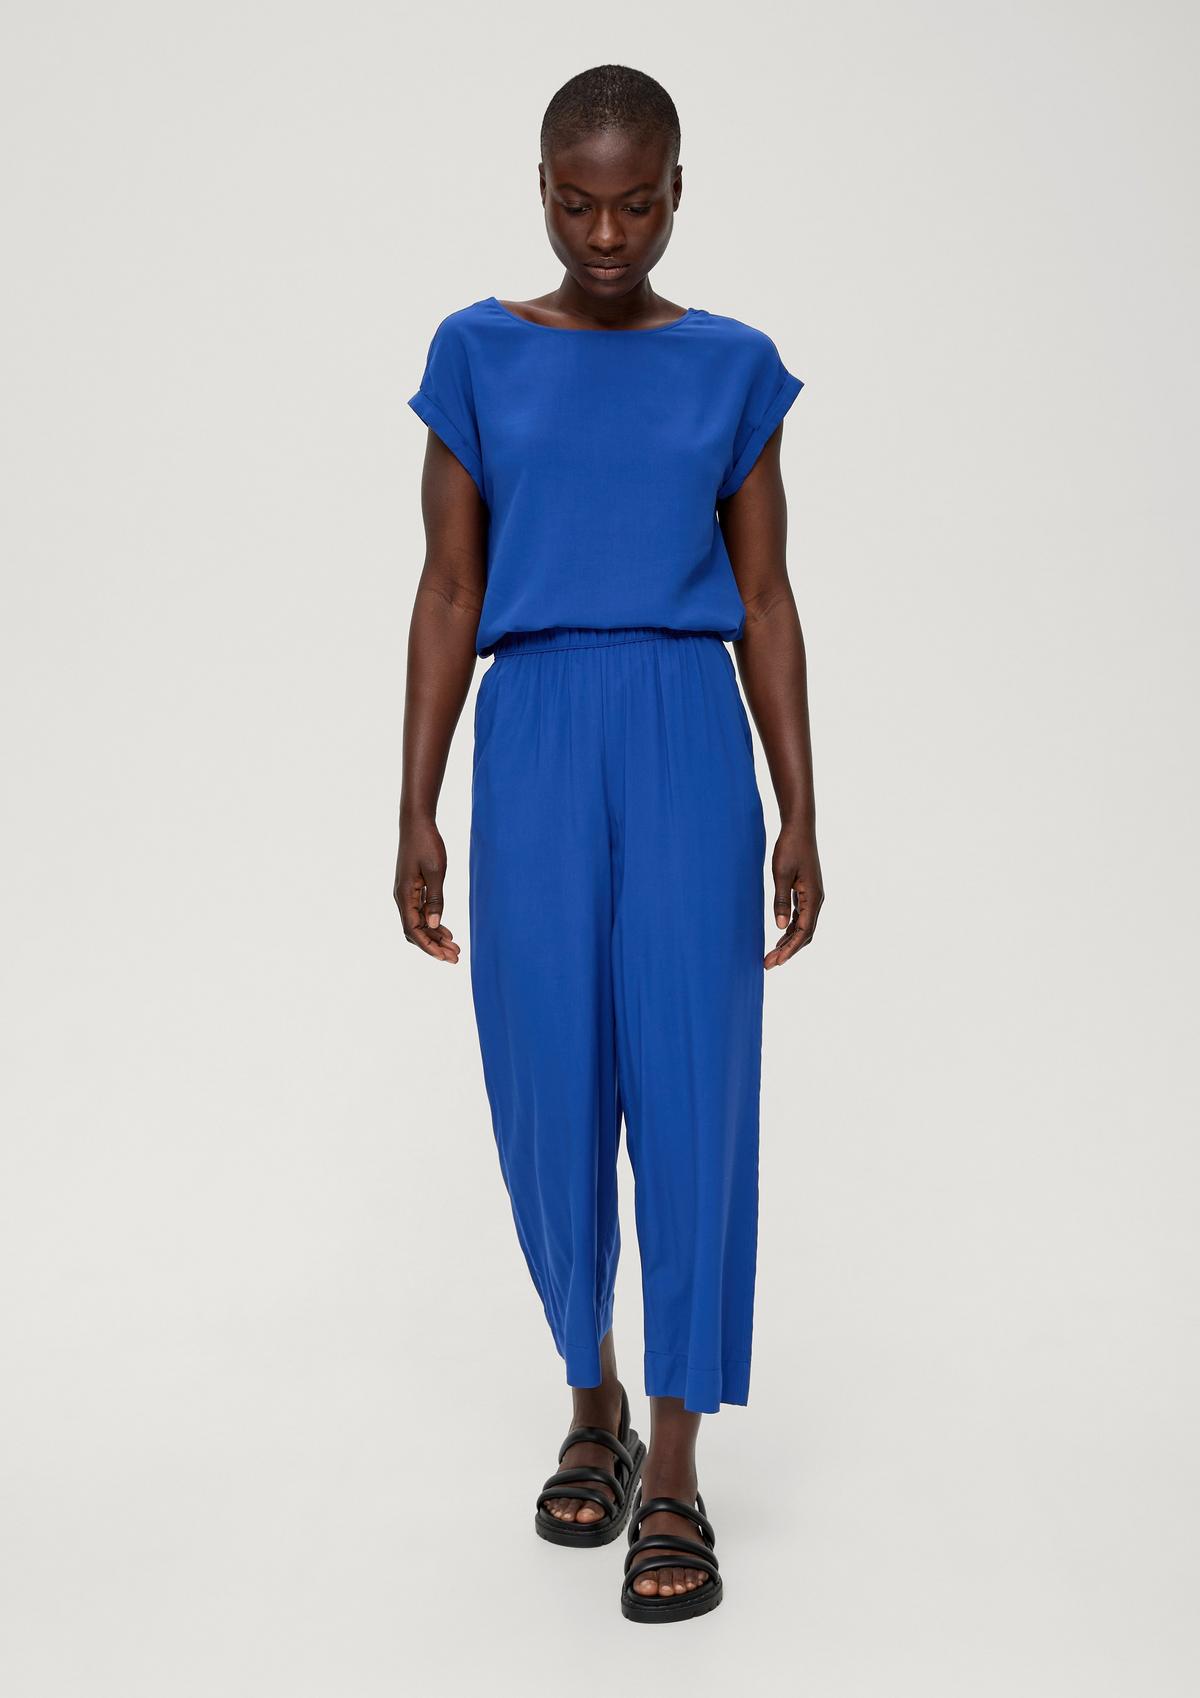 in Culottes: now shop the online Order